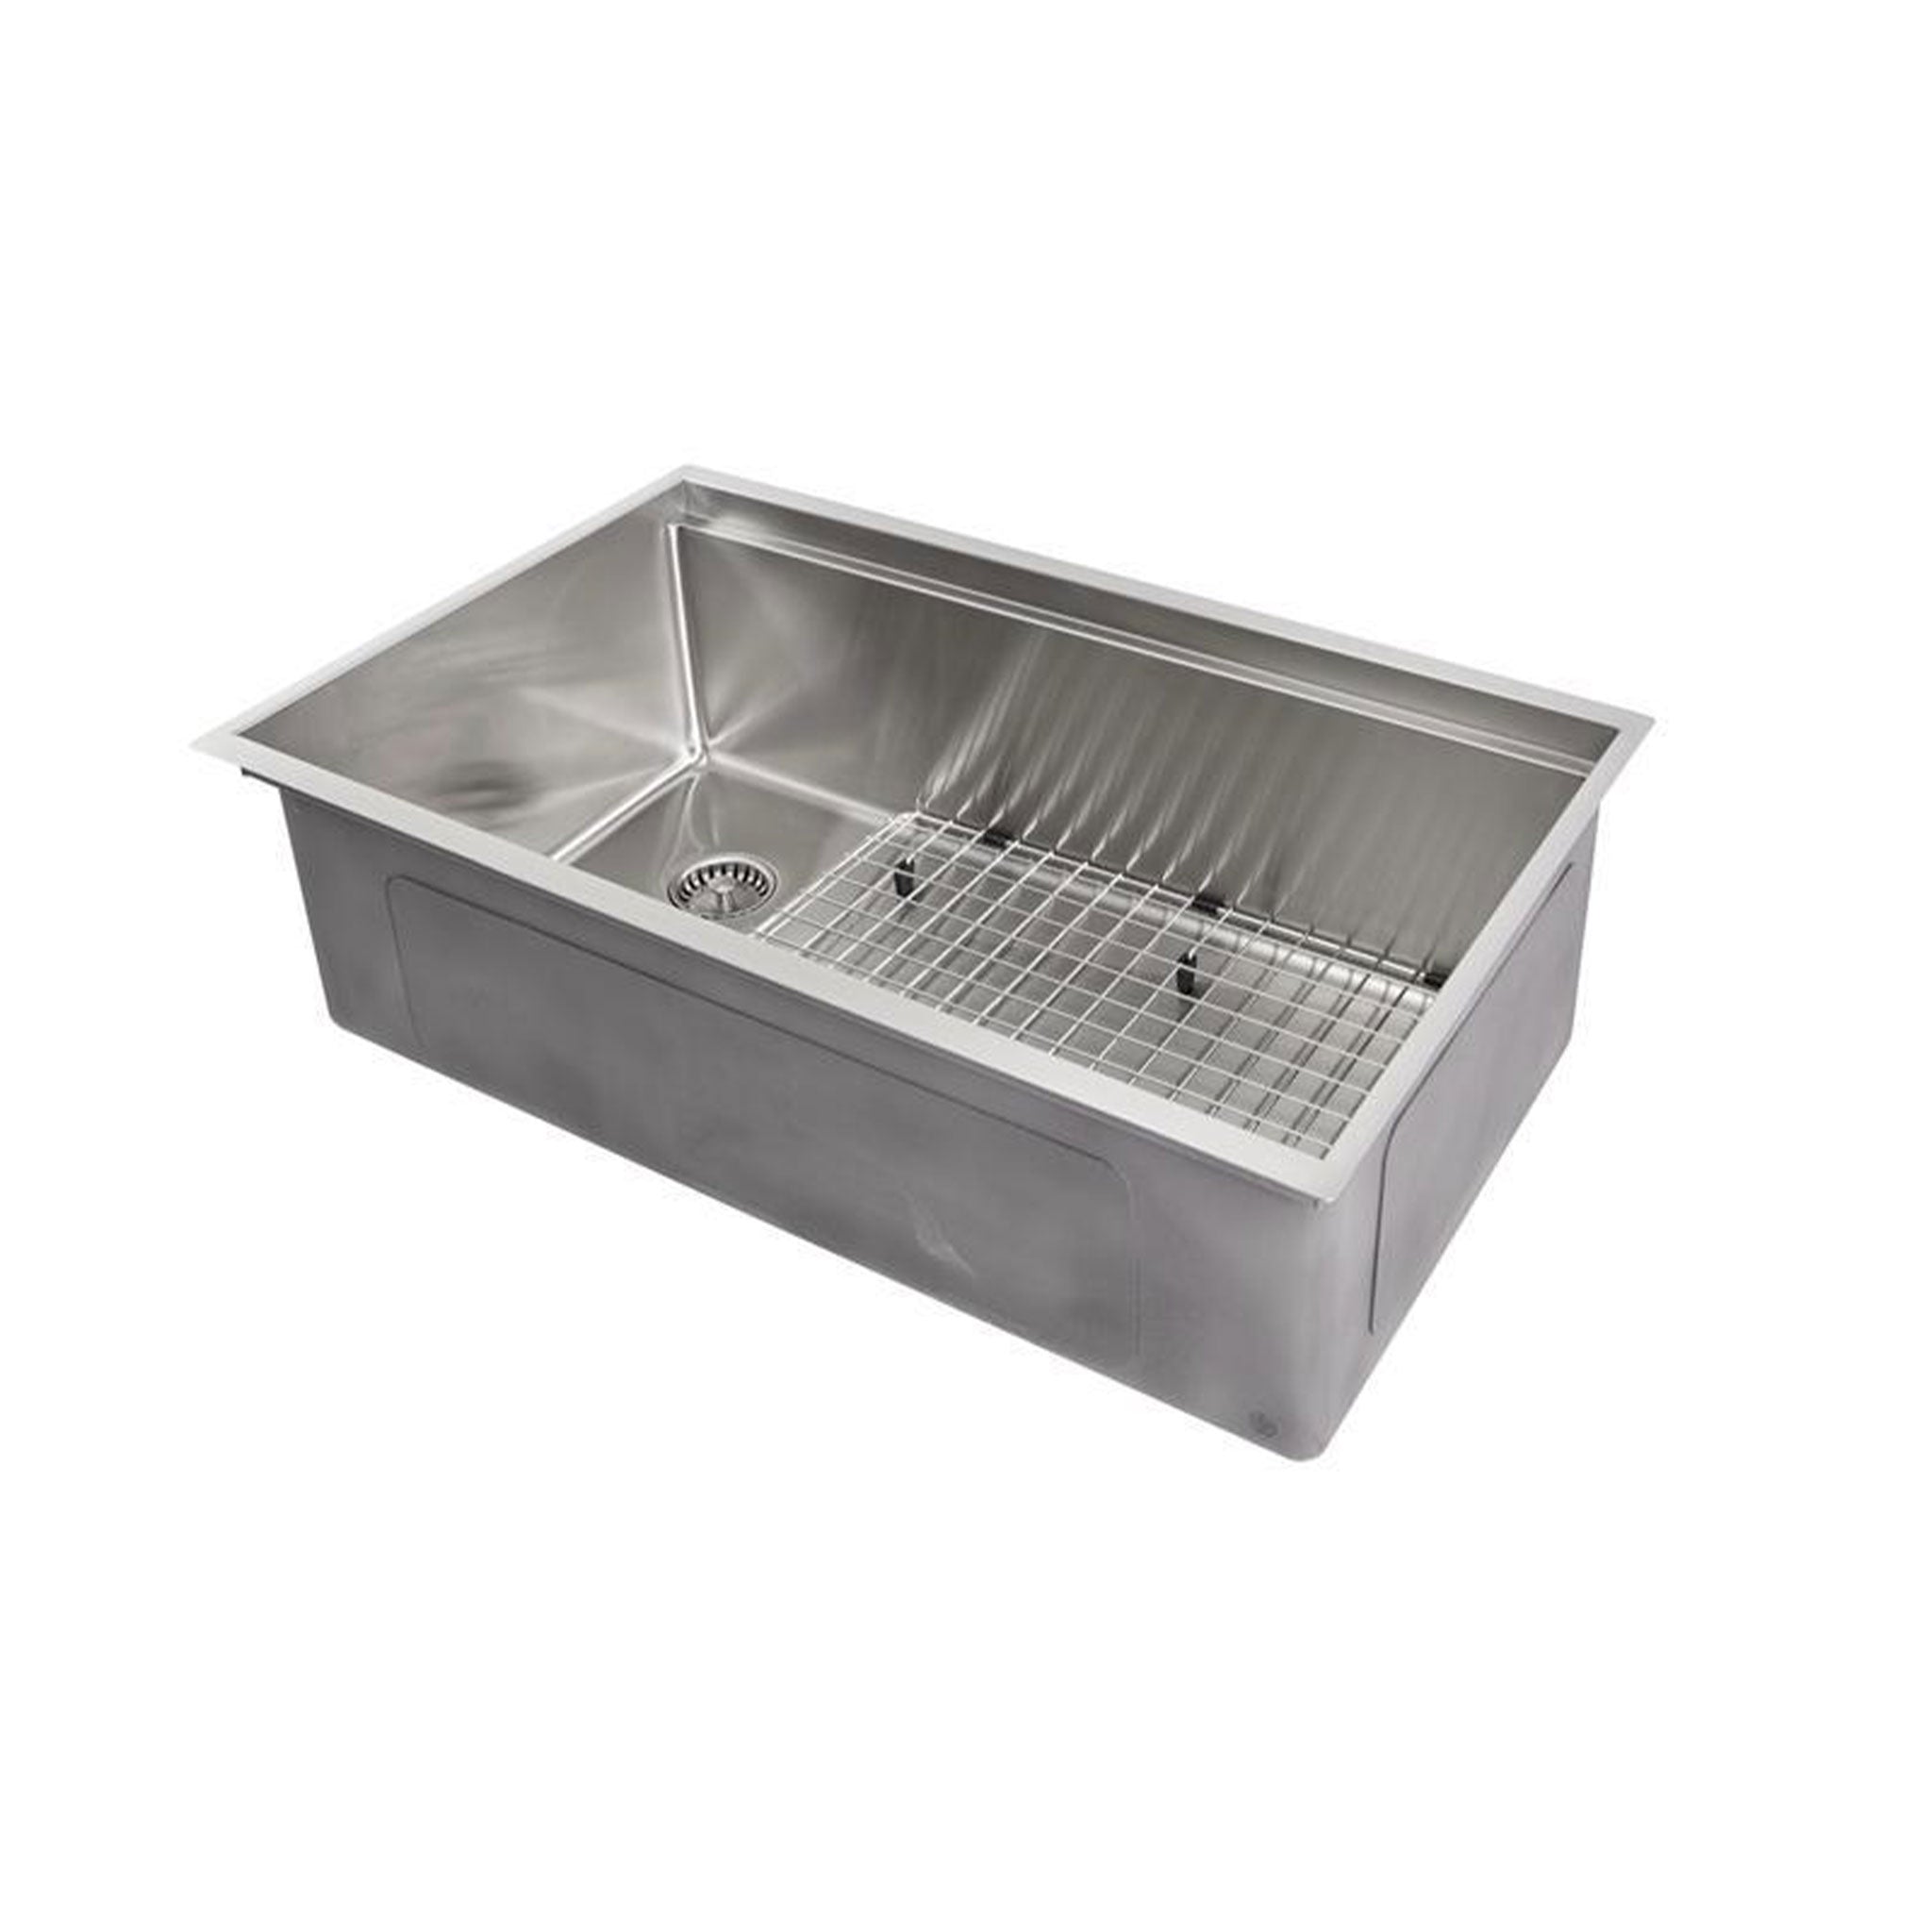 Workstation sink 31” in width with a basin grid and seamless drain.